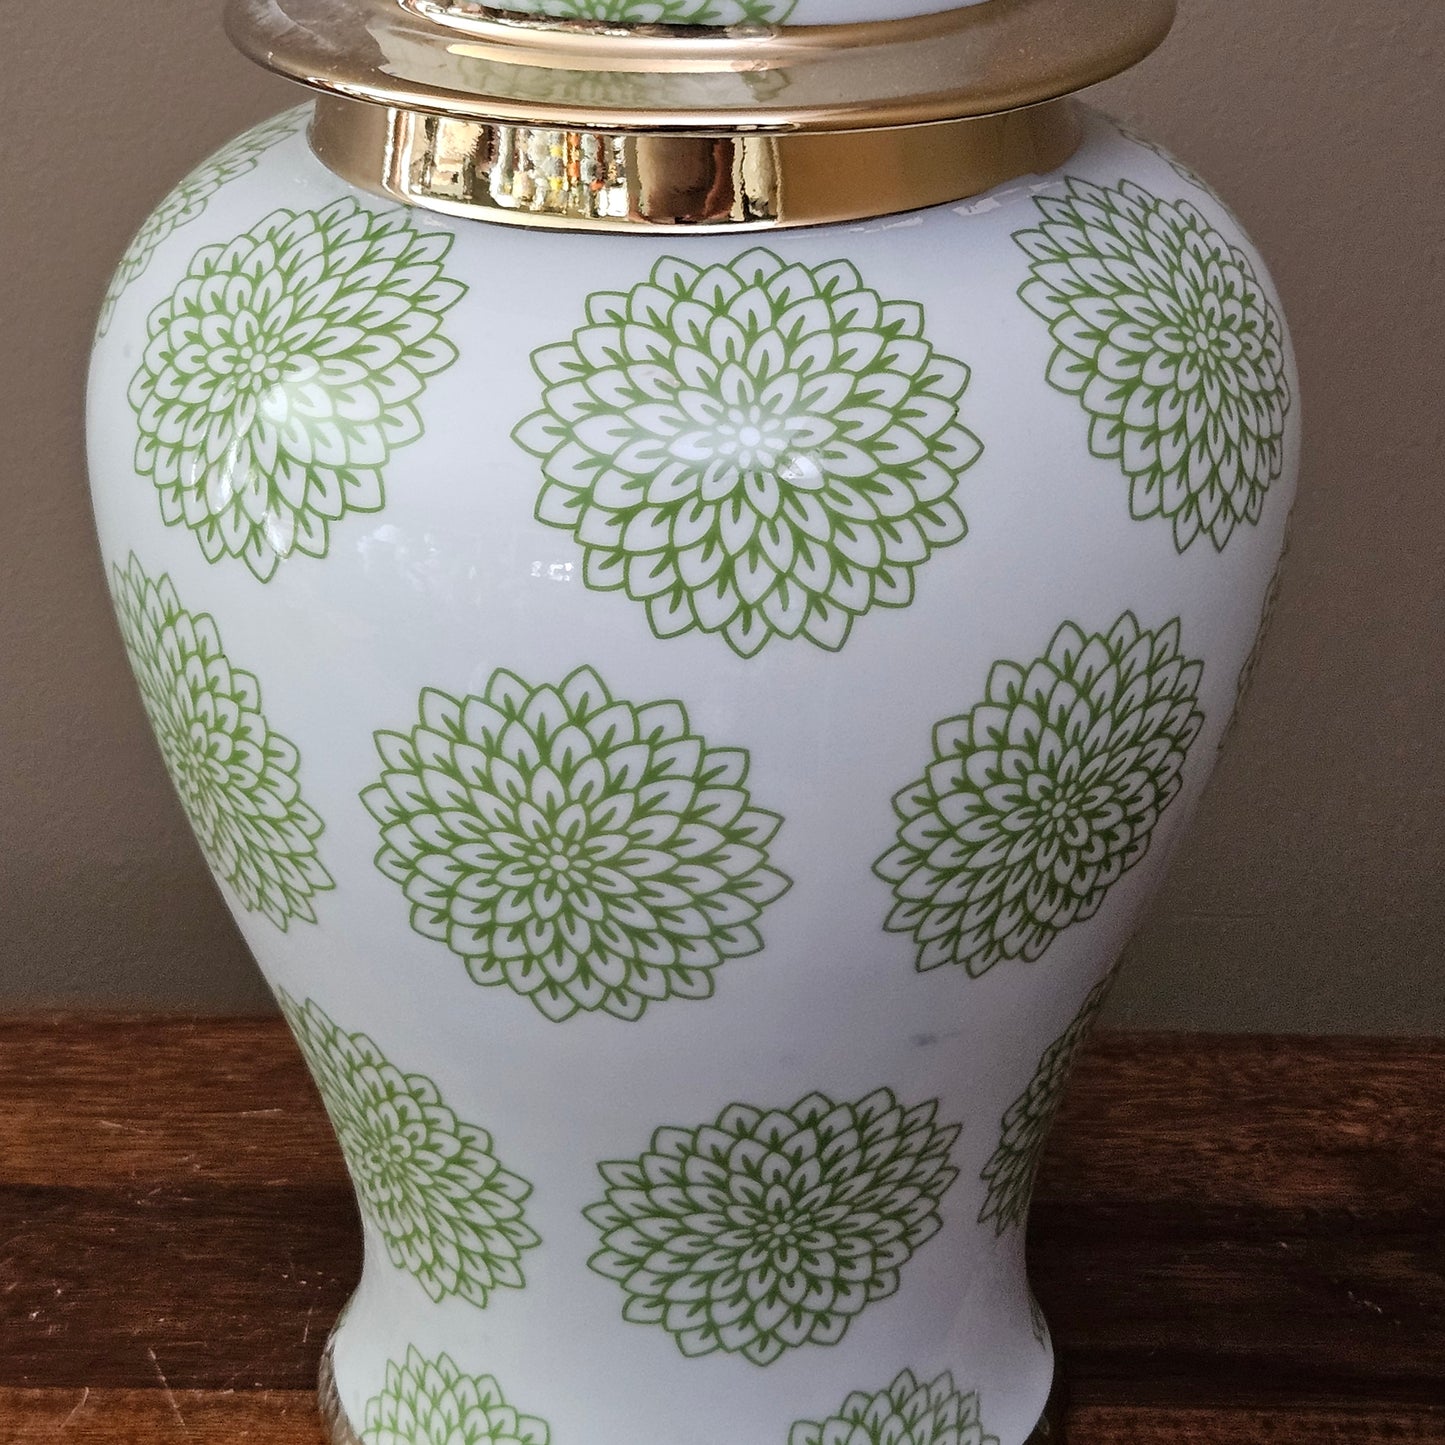 Green & White Chrysanthemum Flower Porcelain Ginger Jar with Lid & Gold Accents ~ 6 Available